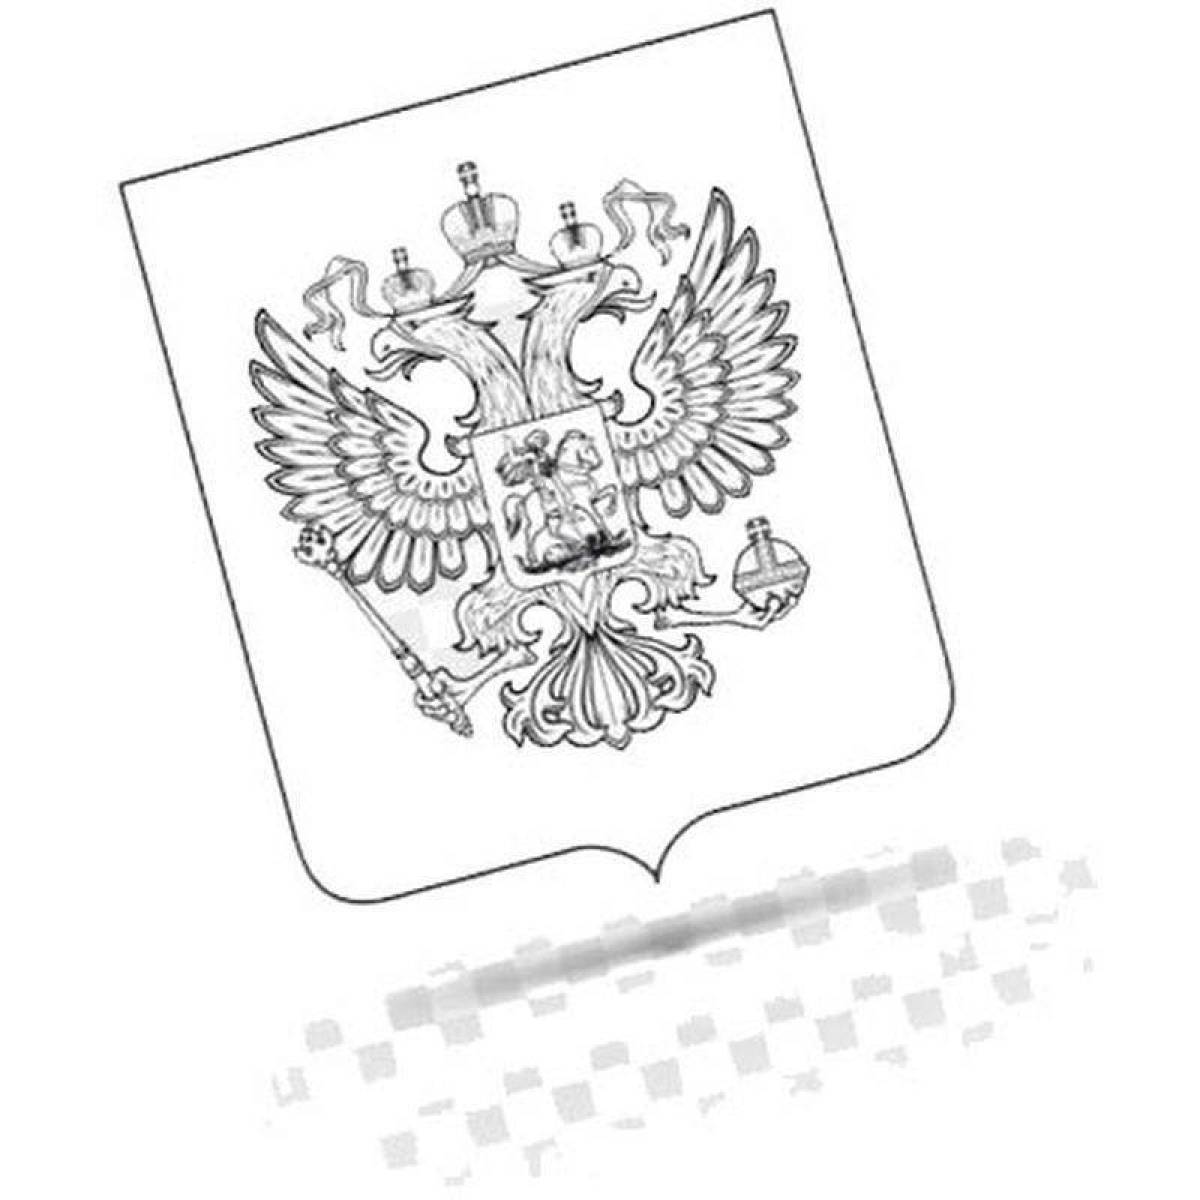 Russian coat of arms #13